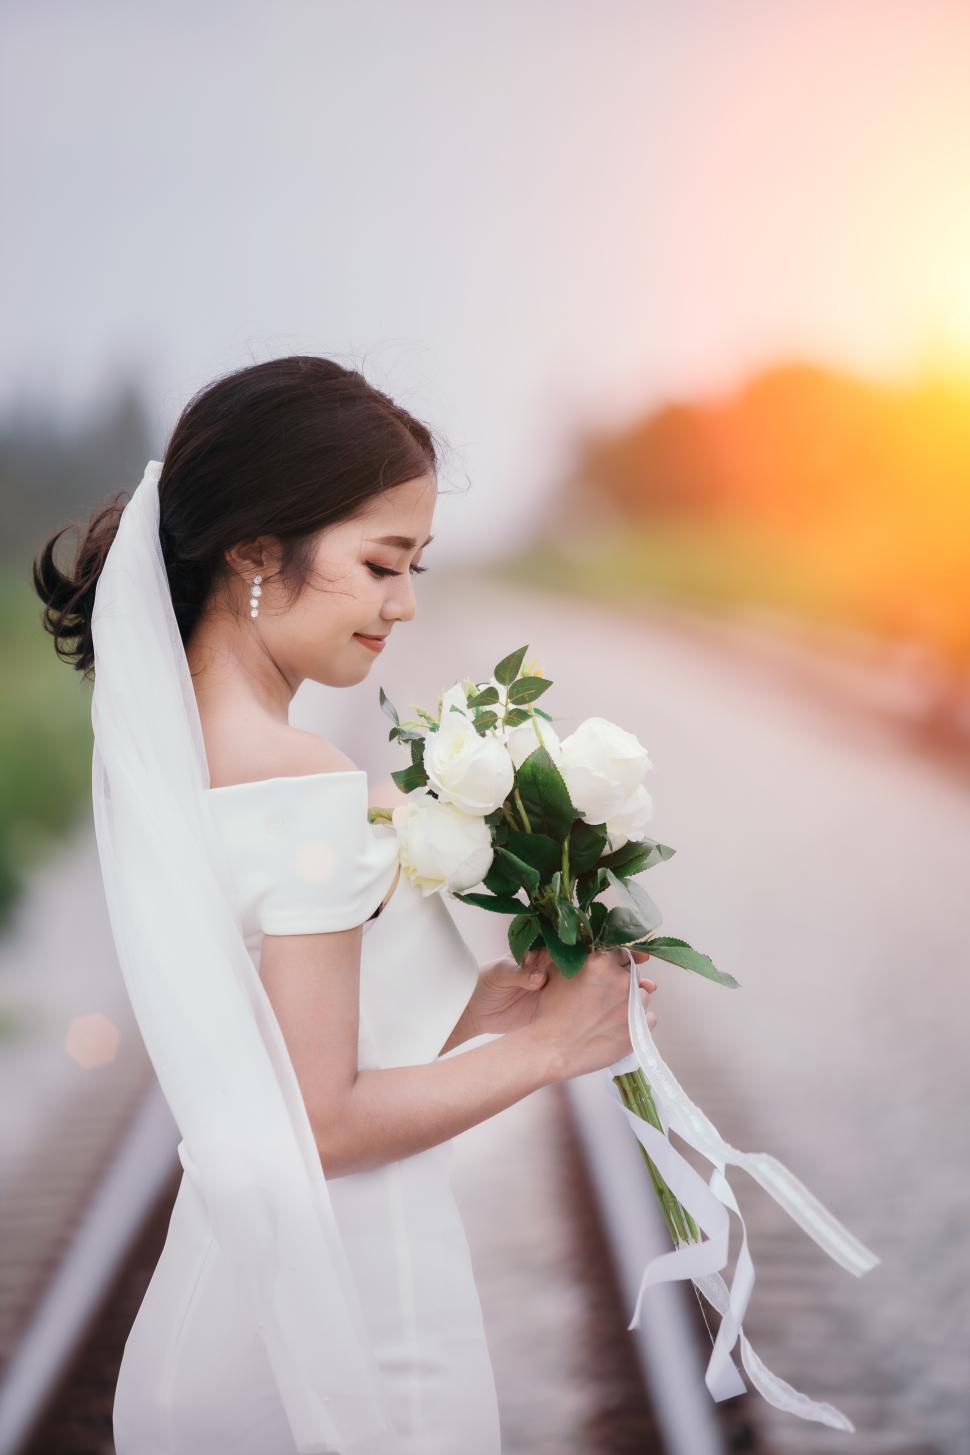 Free Image of The bride and the bouquet 